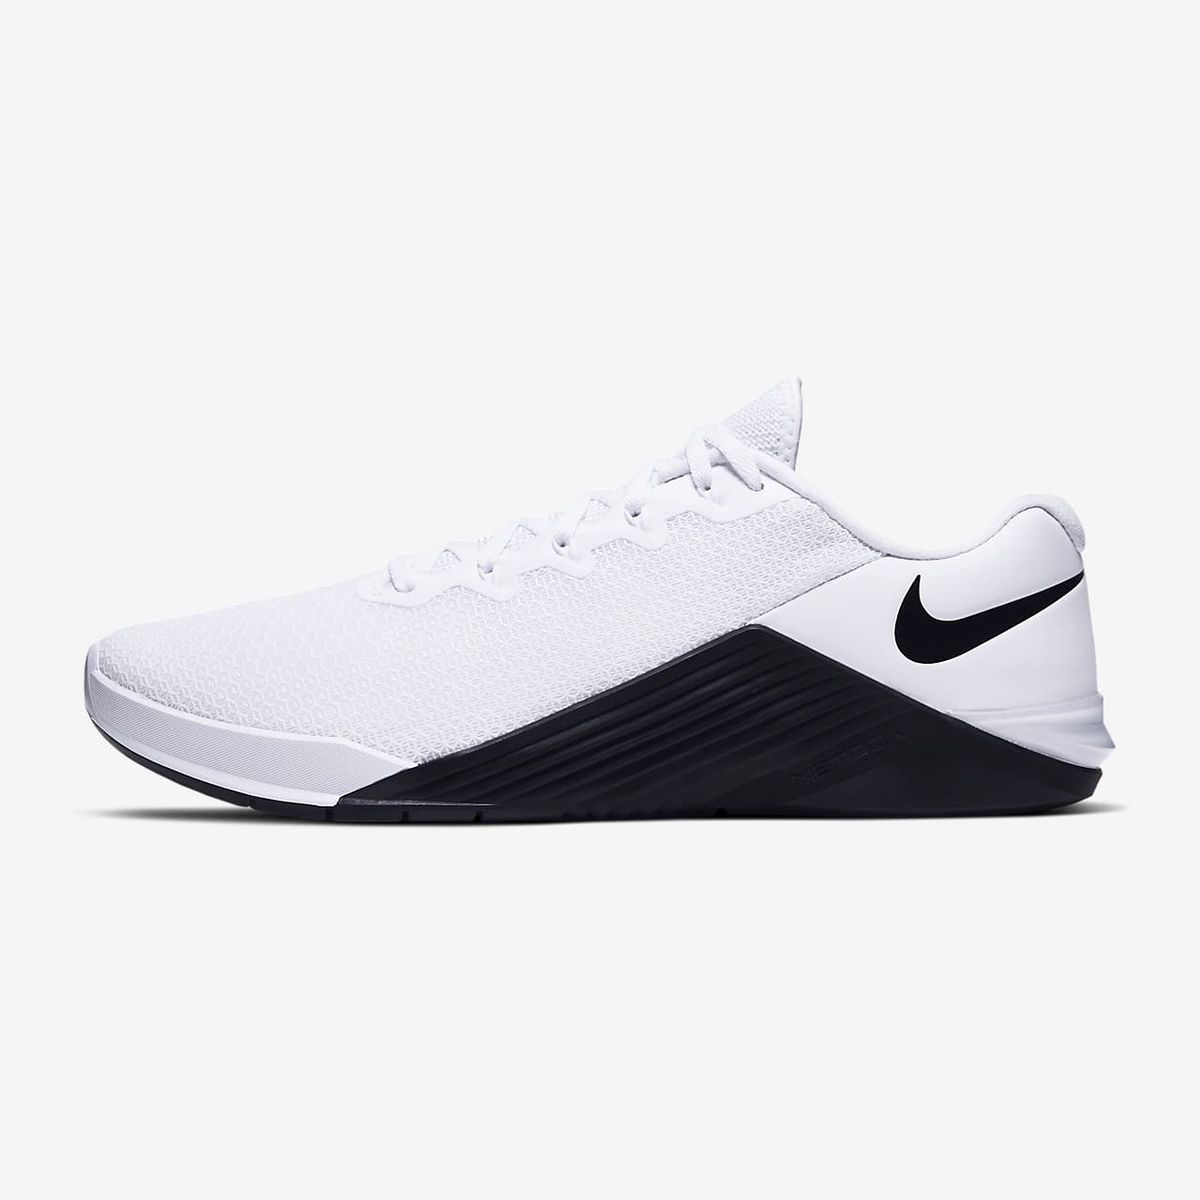 25 black nike workout shoes Best Things to Buy From Nike 2022 | The Strategist